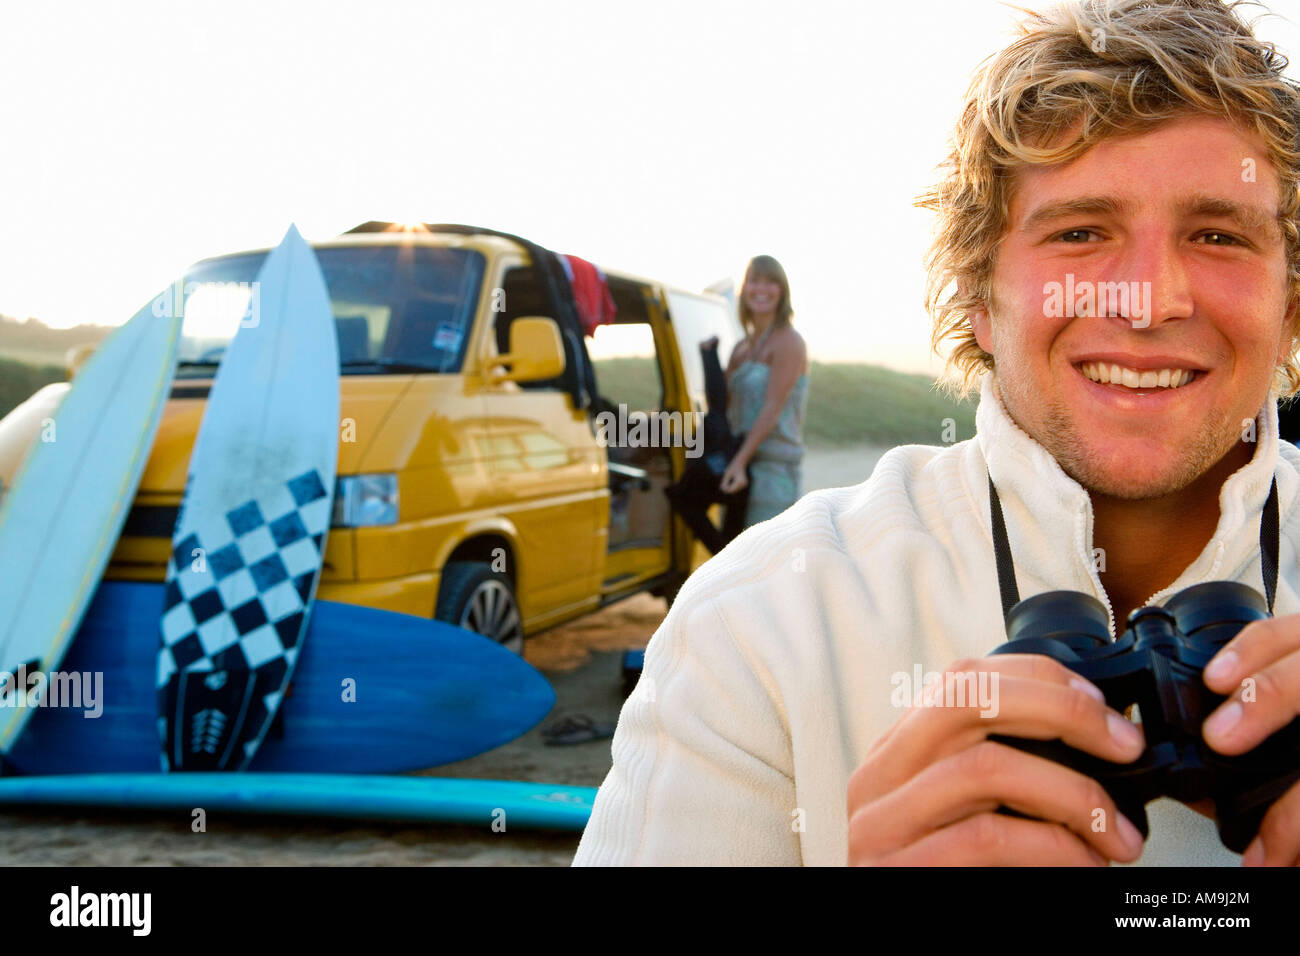 Man on beach with binoculars smiling with woman unloading van at the beach . Stock Photo